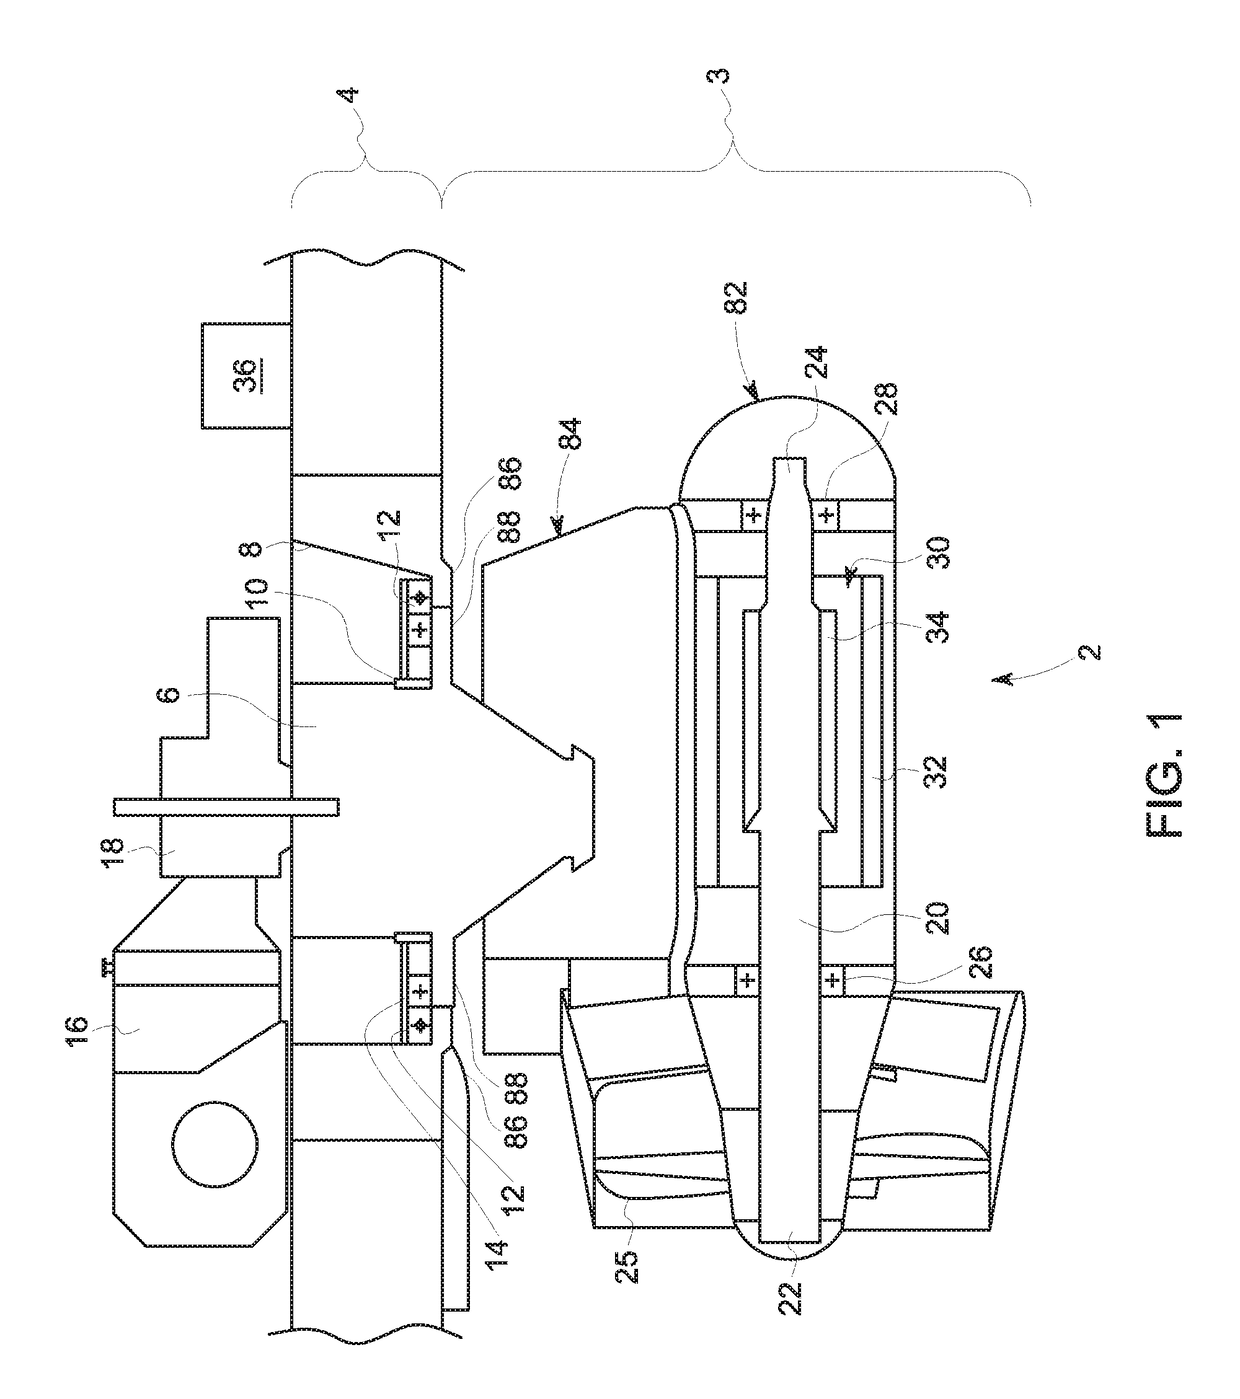 Propulsion unit for an aquatic vehicle having a mobile casing and a hydraulic fluid conditioning module